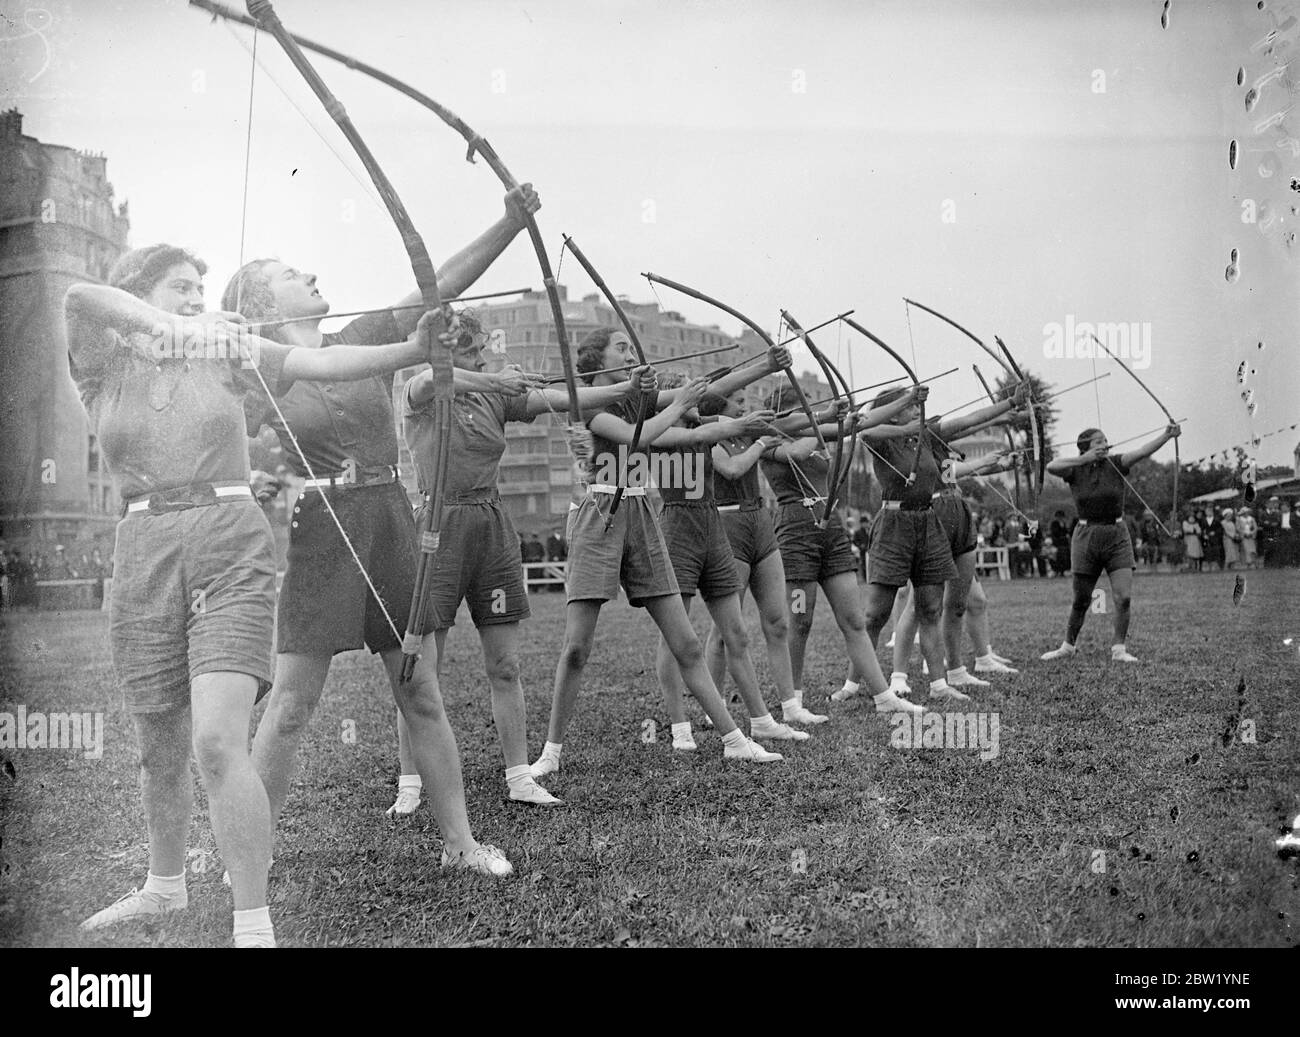 French girl shoots straight with the bow. Nearly 1000 young girl athletes met in their 10th competition at the Stade Elizabeth near the Port d'Orleans in Paris. Photo shows, girl competitors in the archery contest taking aim. 21 June 1937 Stock Photo